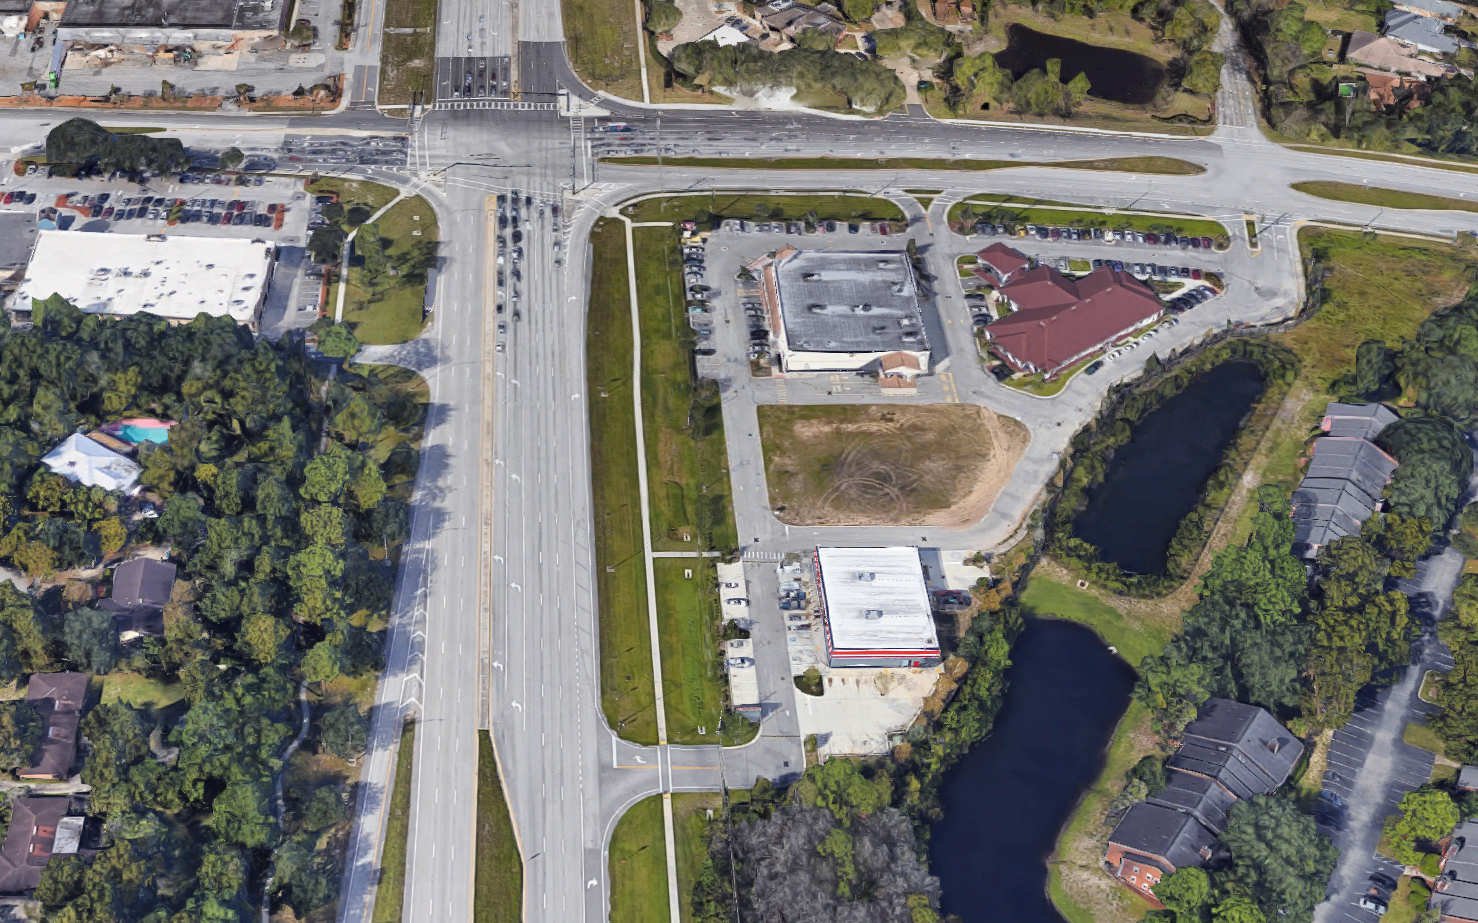 A Whataburger is planned on about 1 acre between Walgreens and AutoZone. (Google)